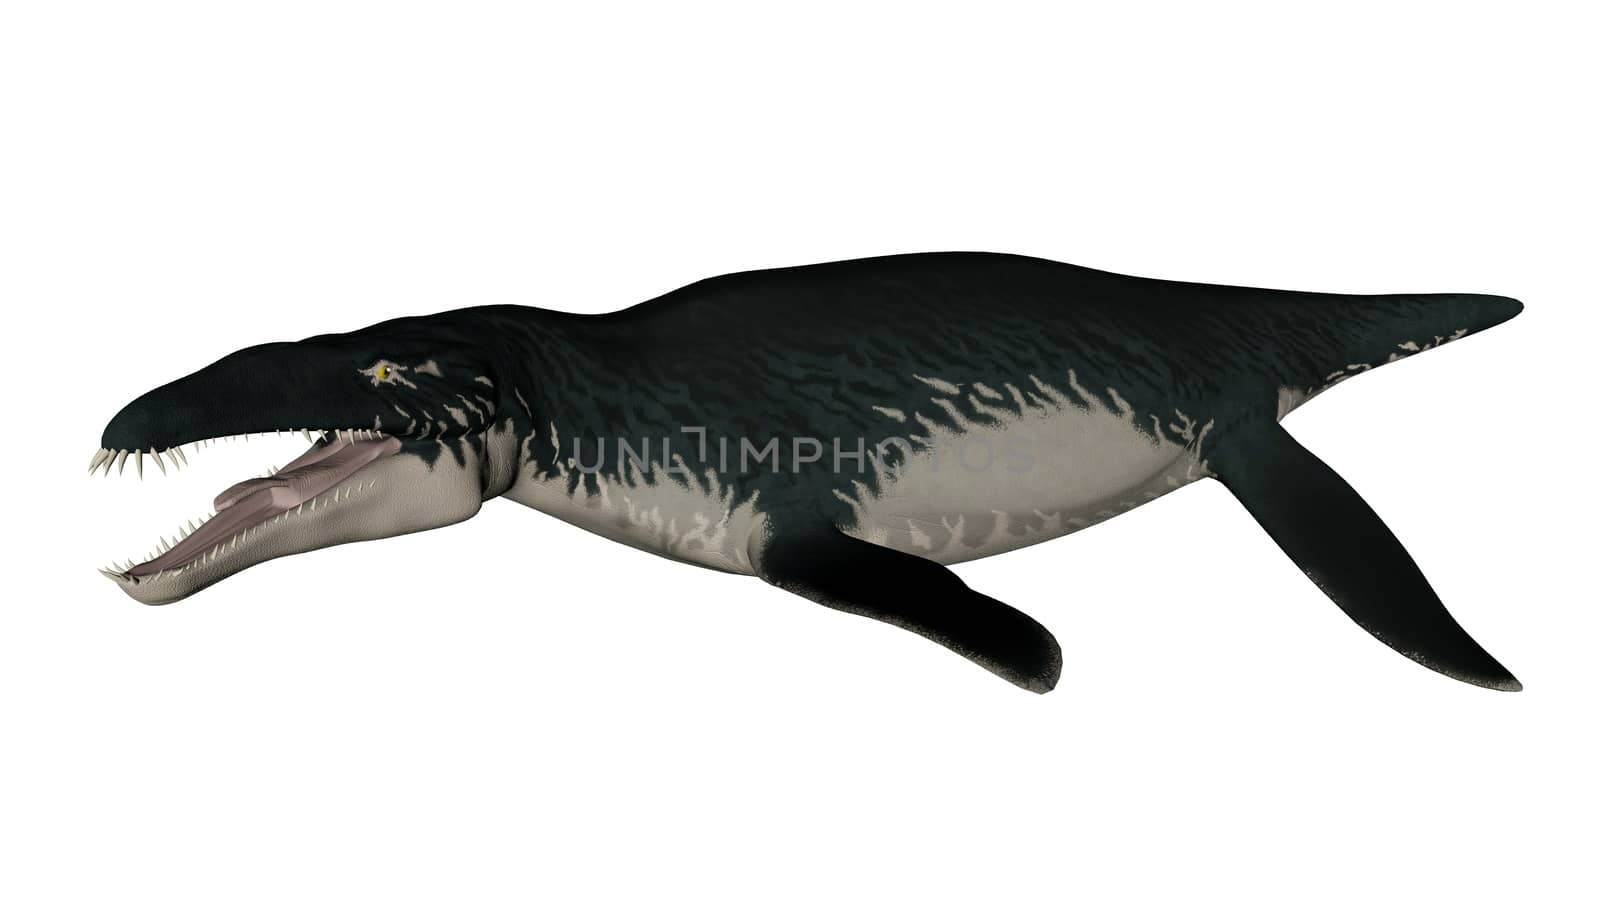 Liopleurodon prehistoric fish with open mouth isolated in white background - 3D render